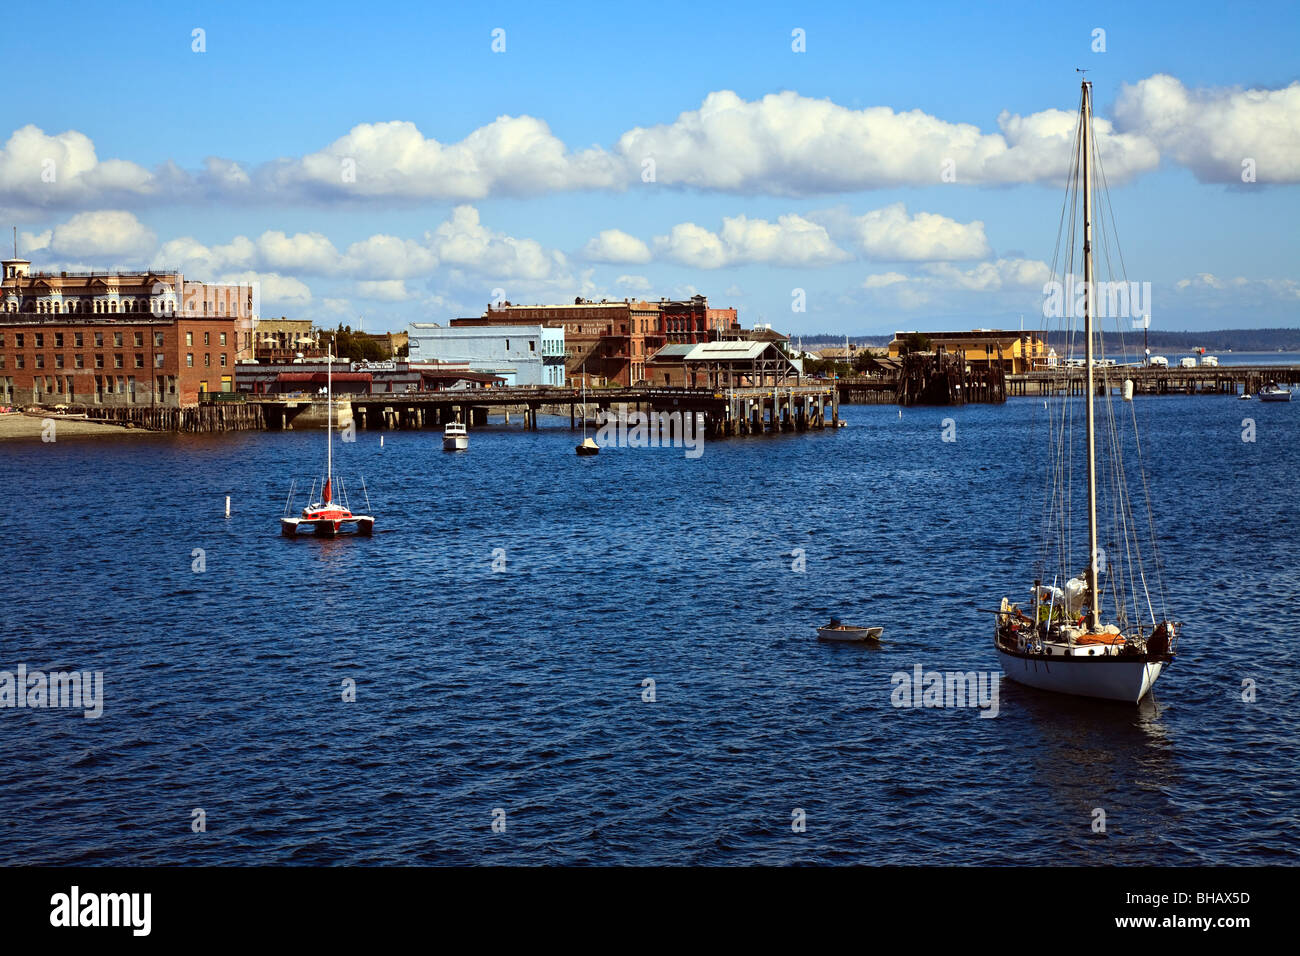 Port Townsend waterfront from Puget Sound with boats anchored in foreground Stock Photo